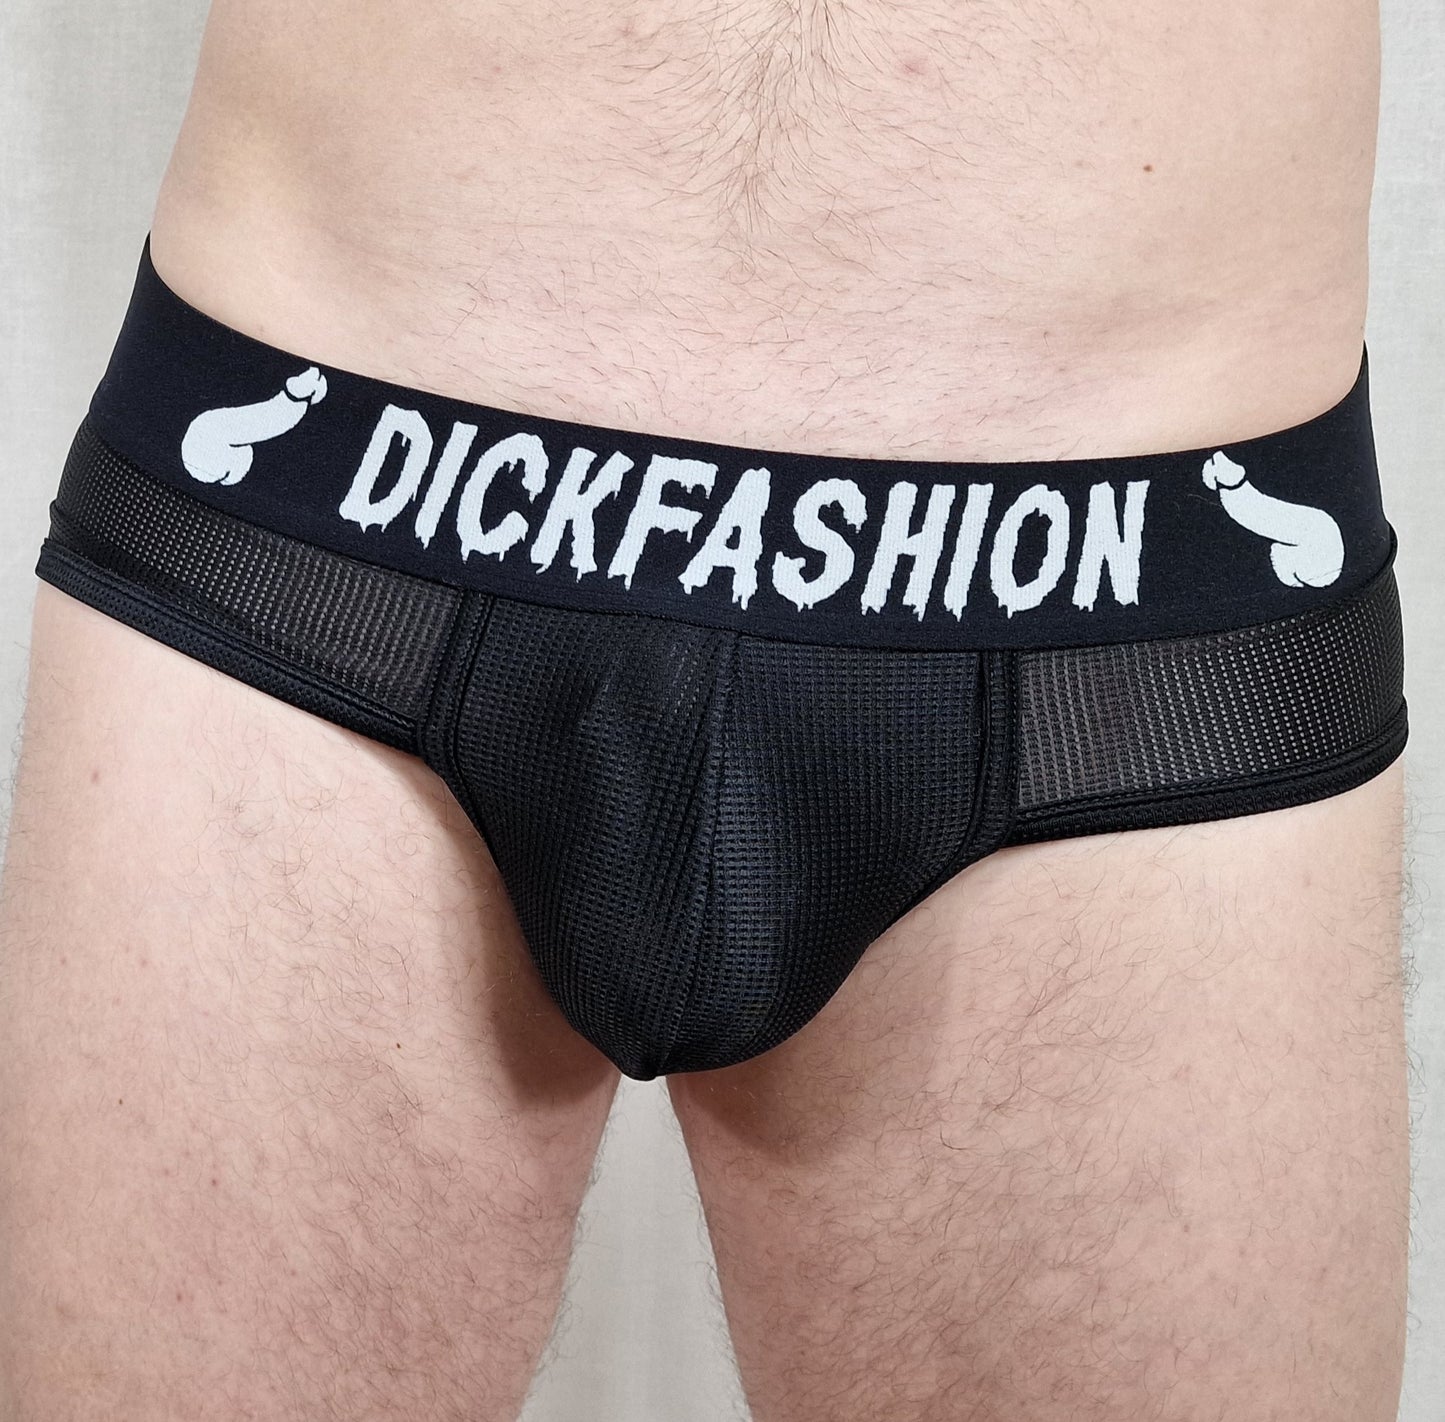 Stylish and comfortable briefs underpants in sport mesh black/white